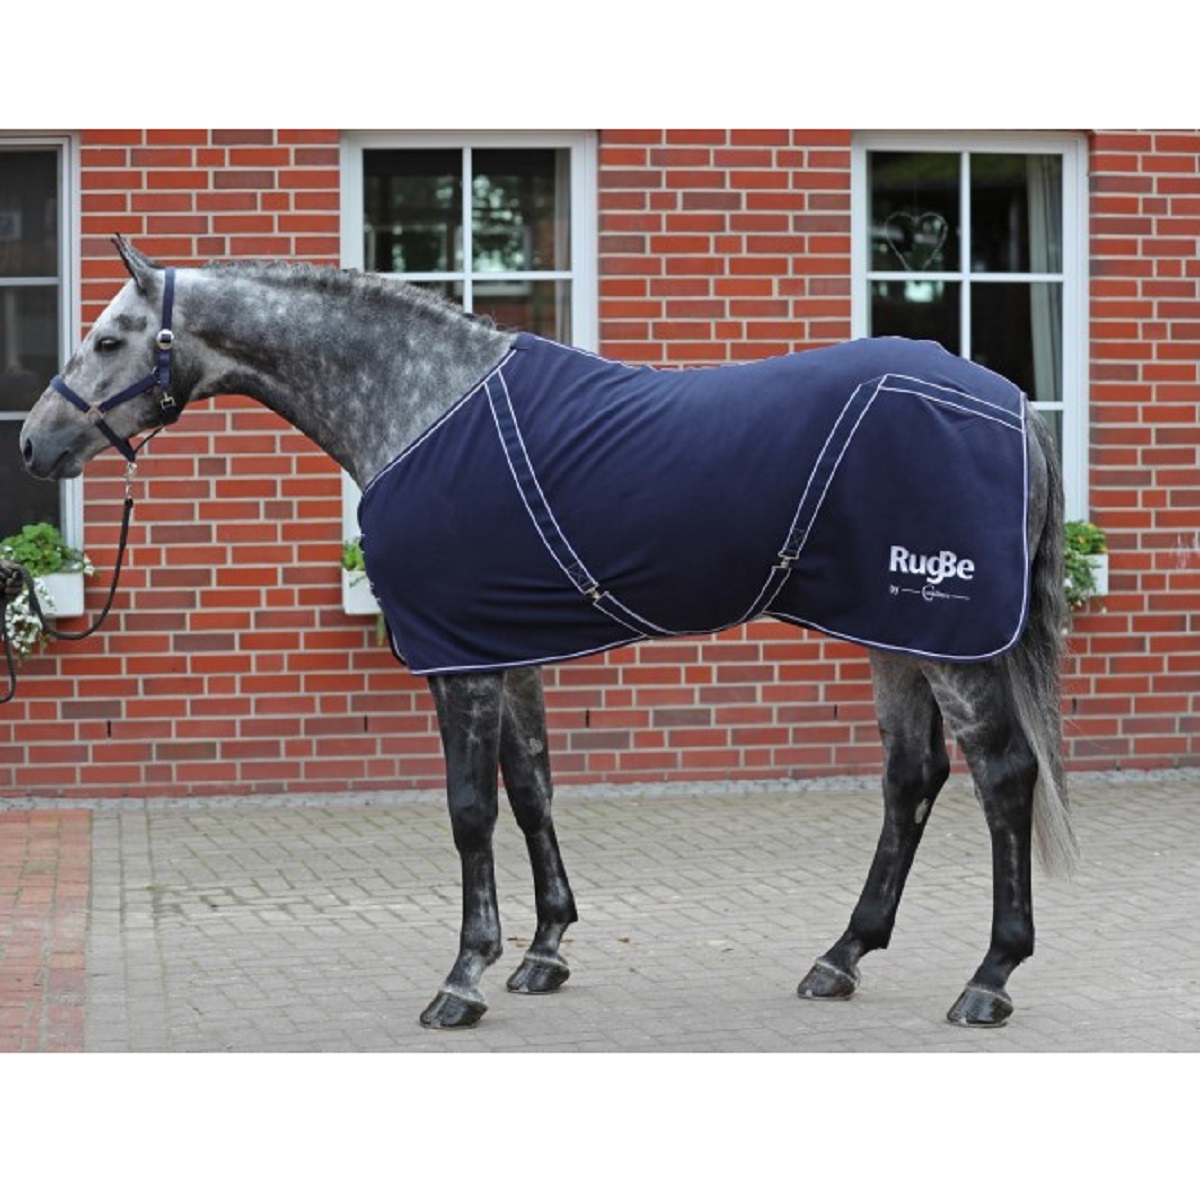 Cooler Rug RugBe Classic navy